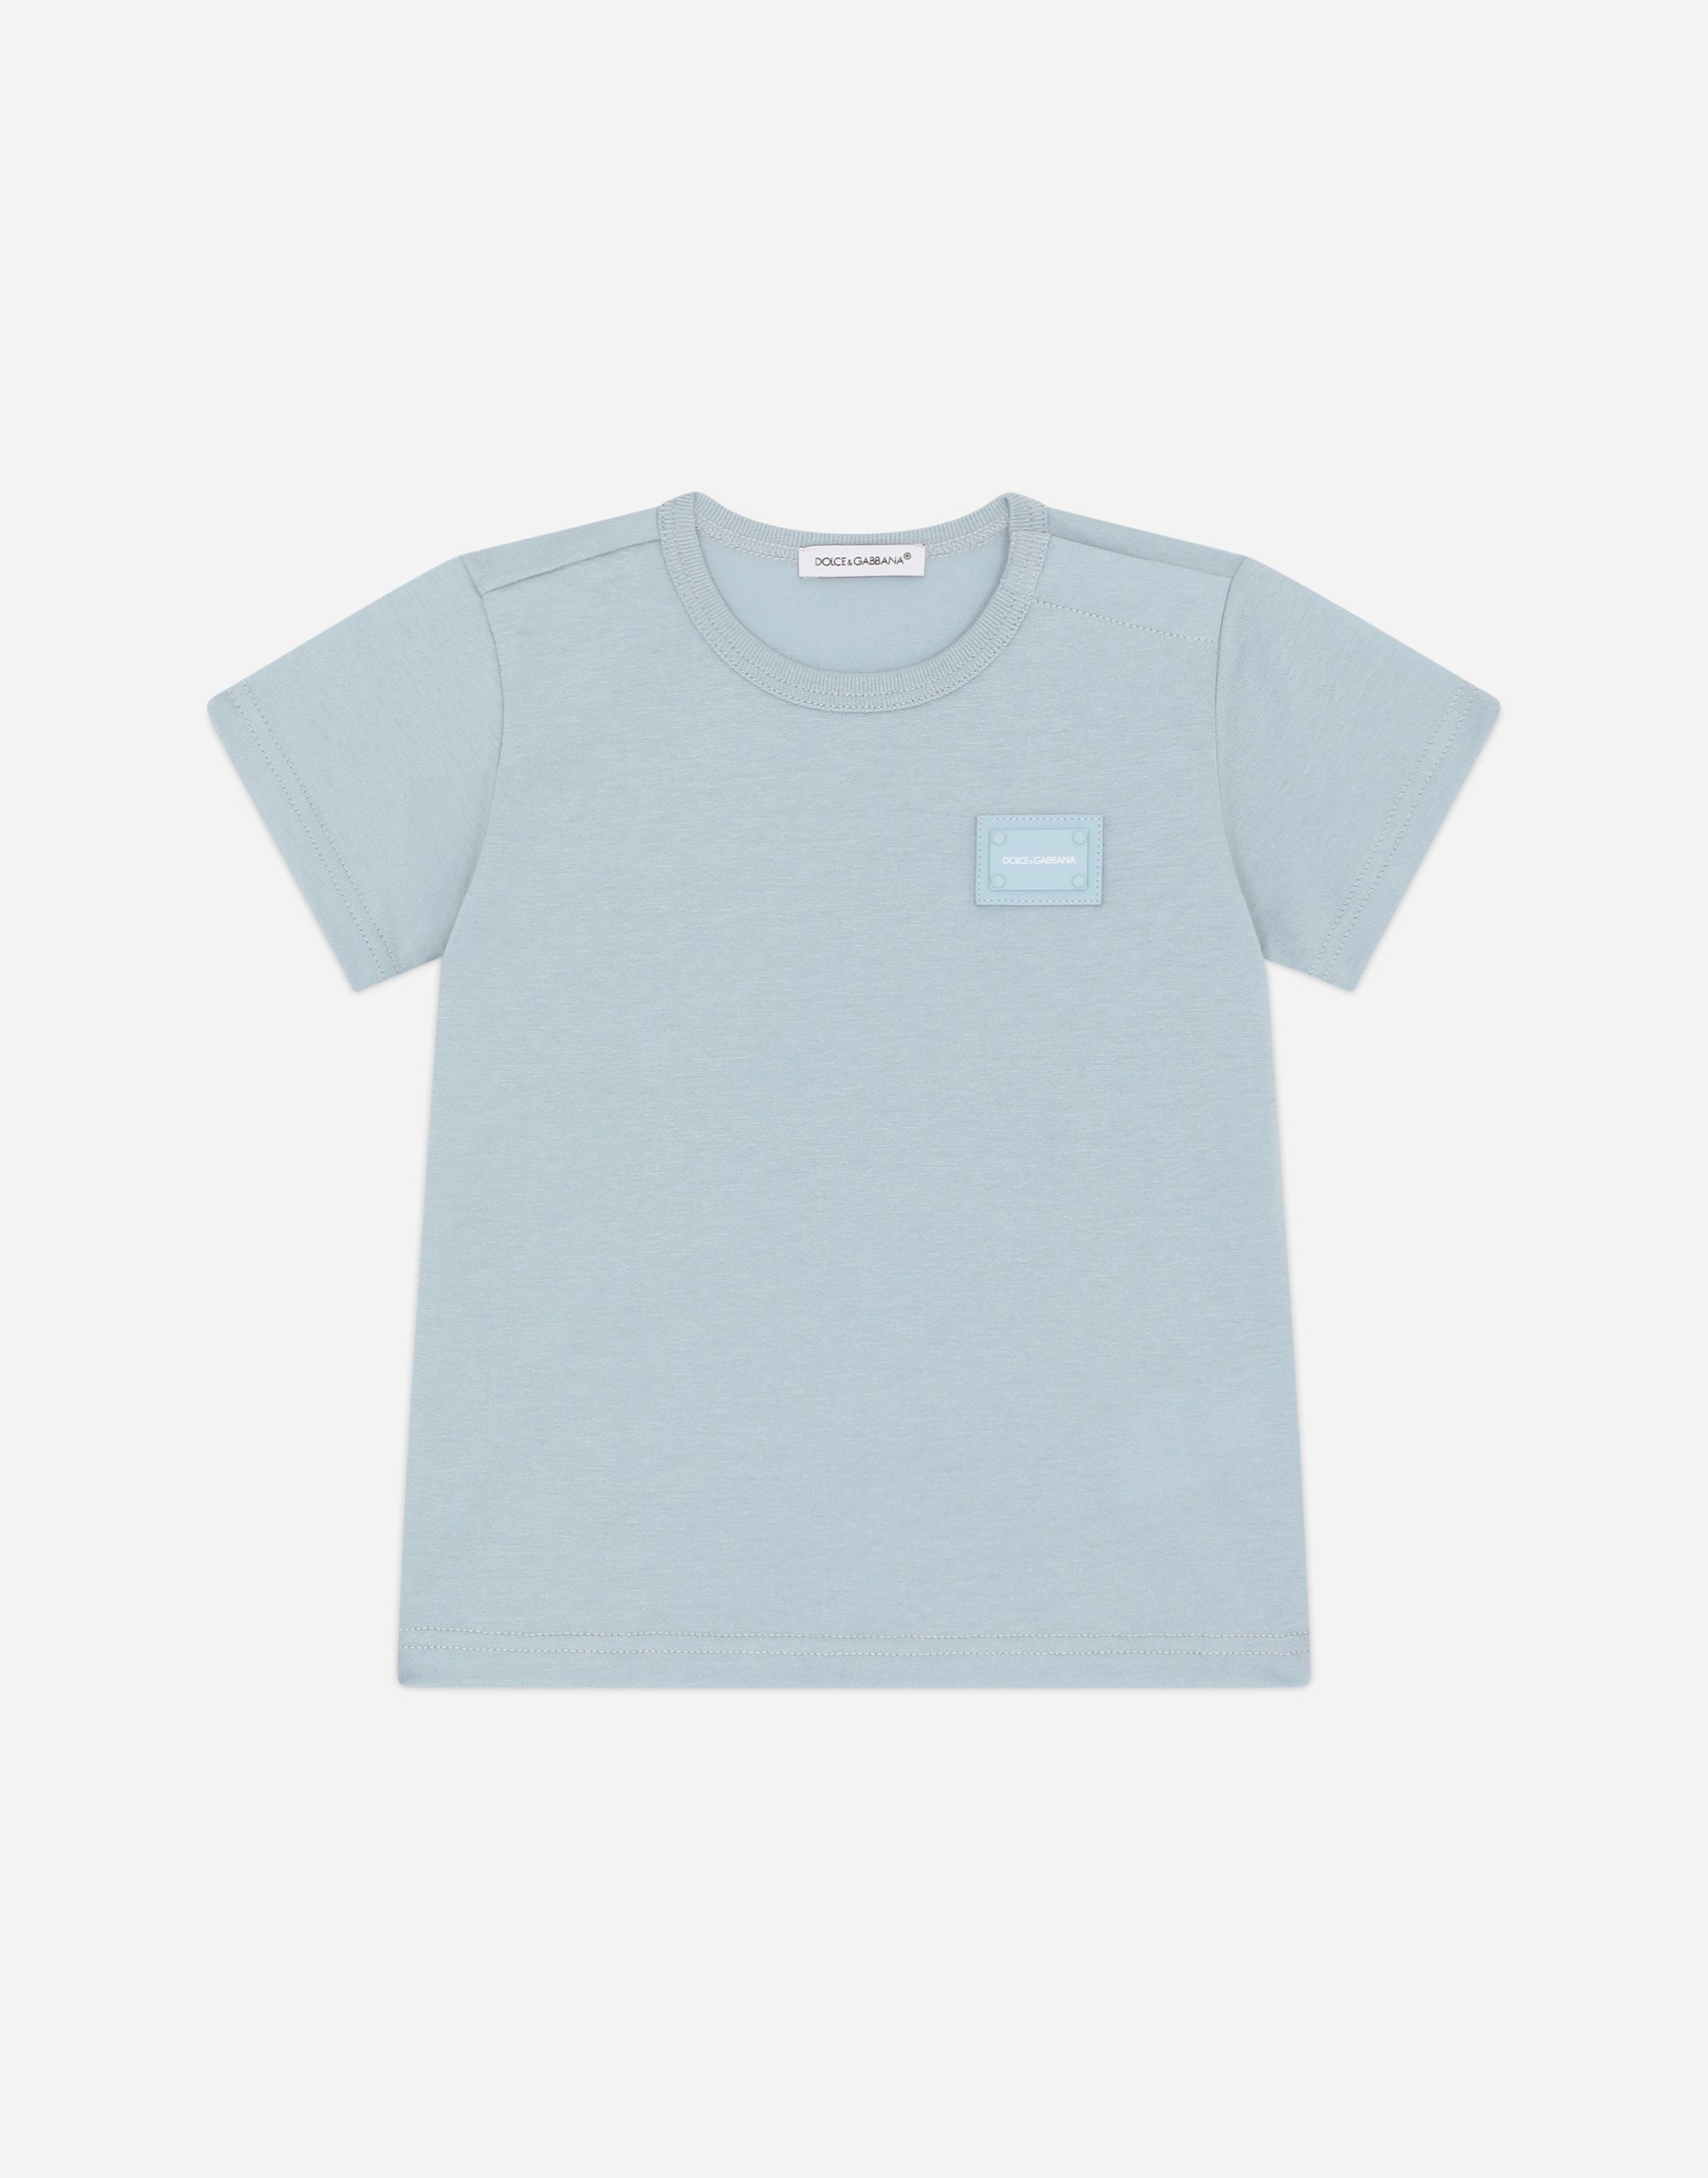 Jersey t-shirt with plate in Azure